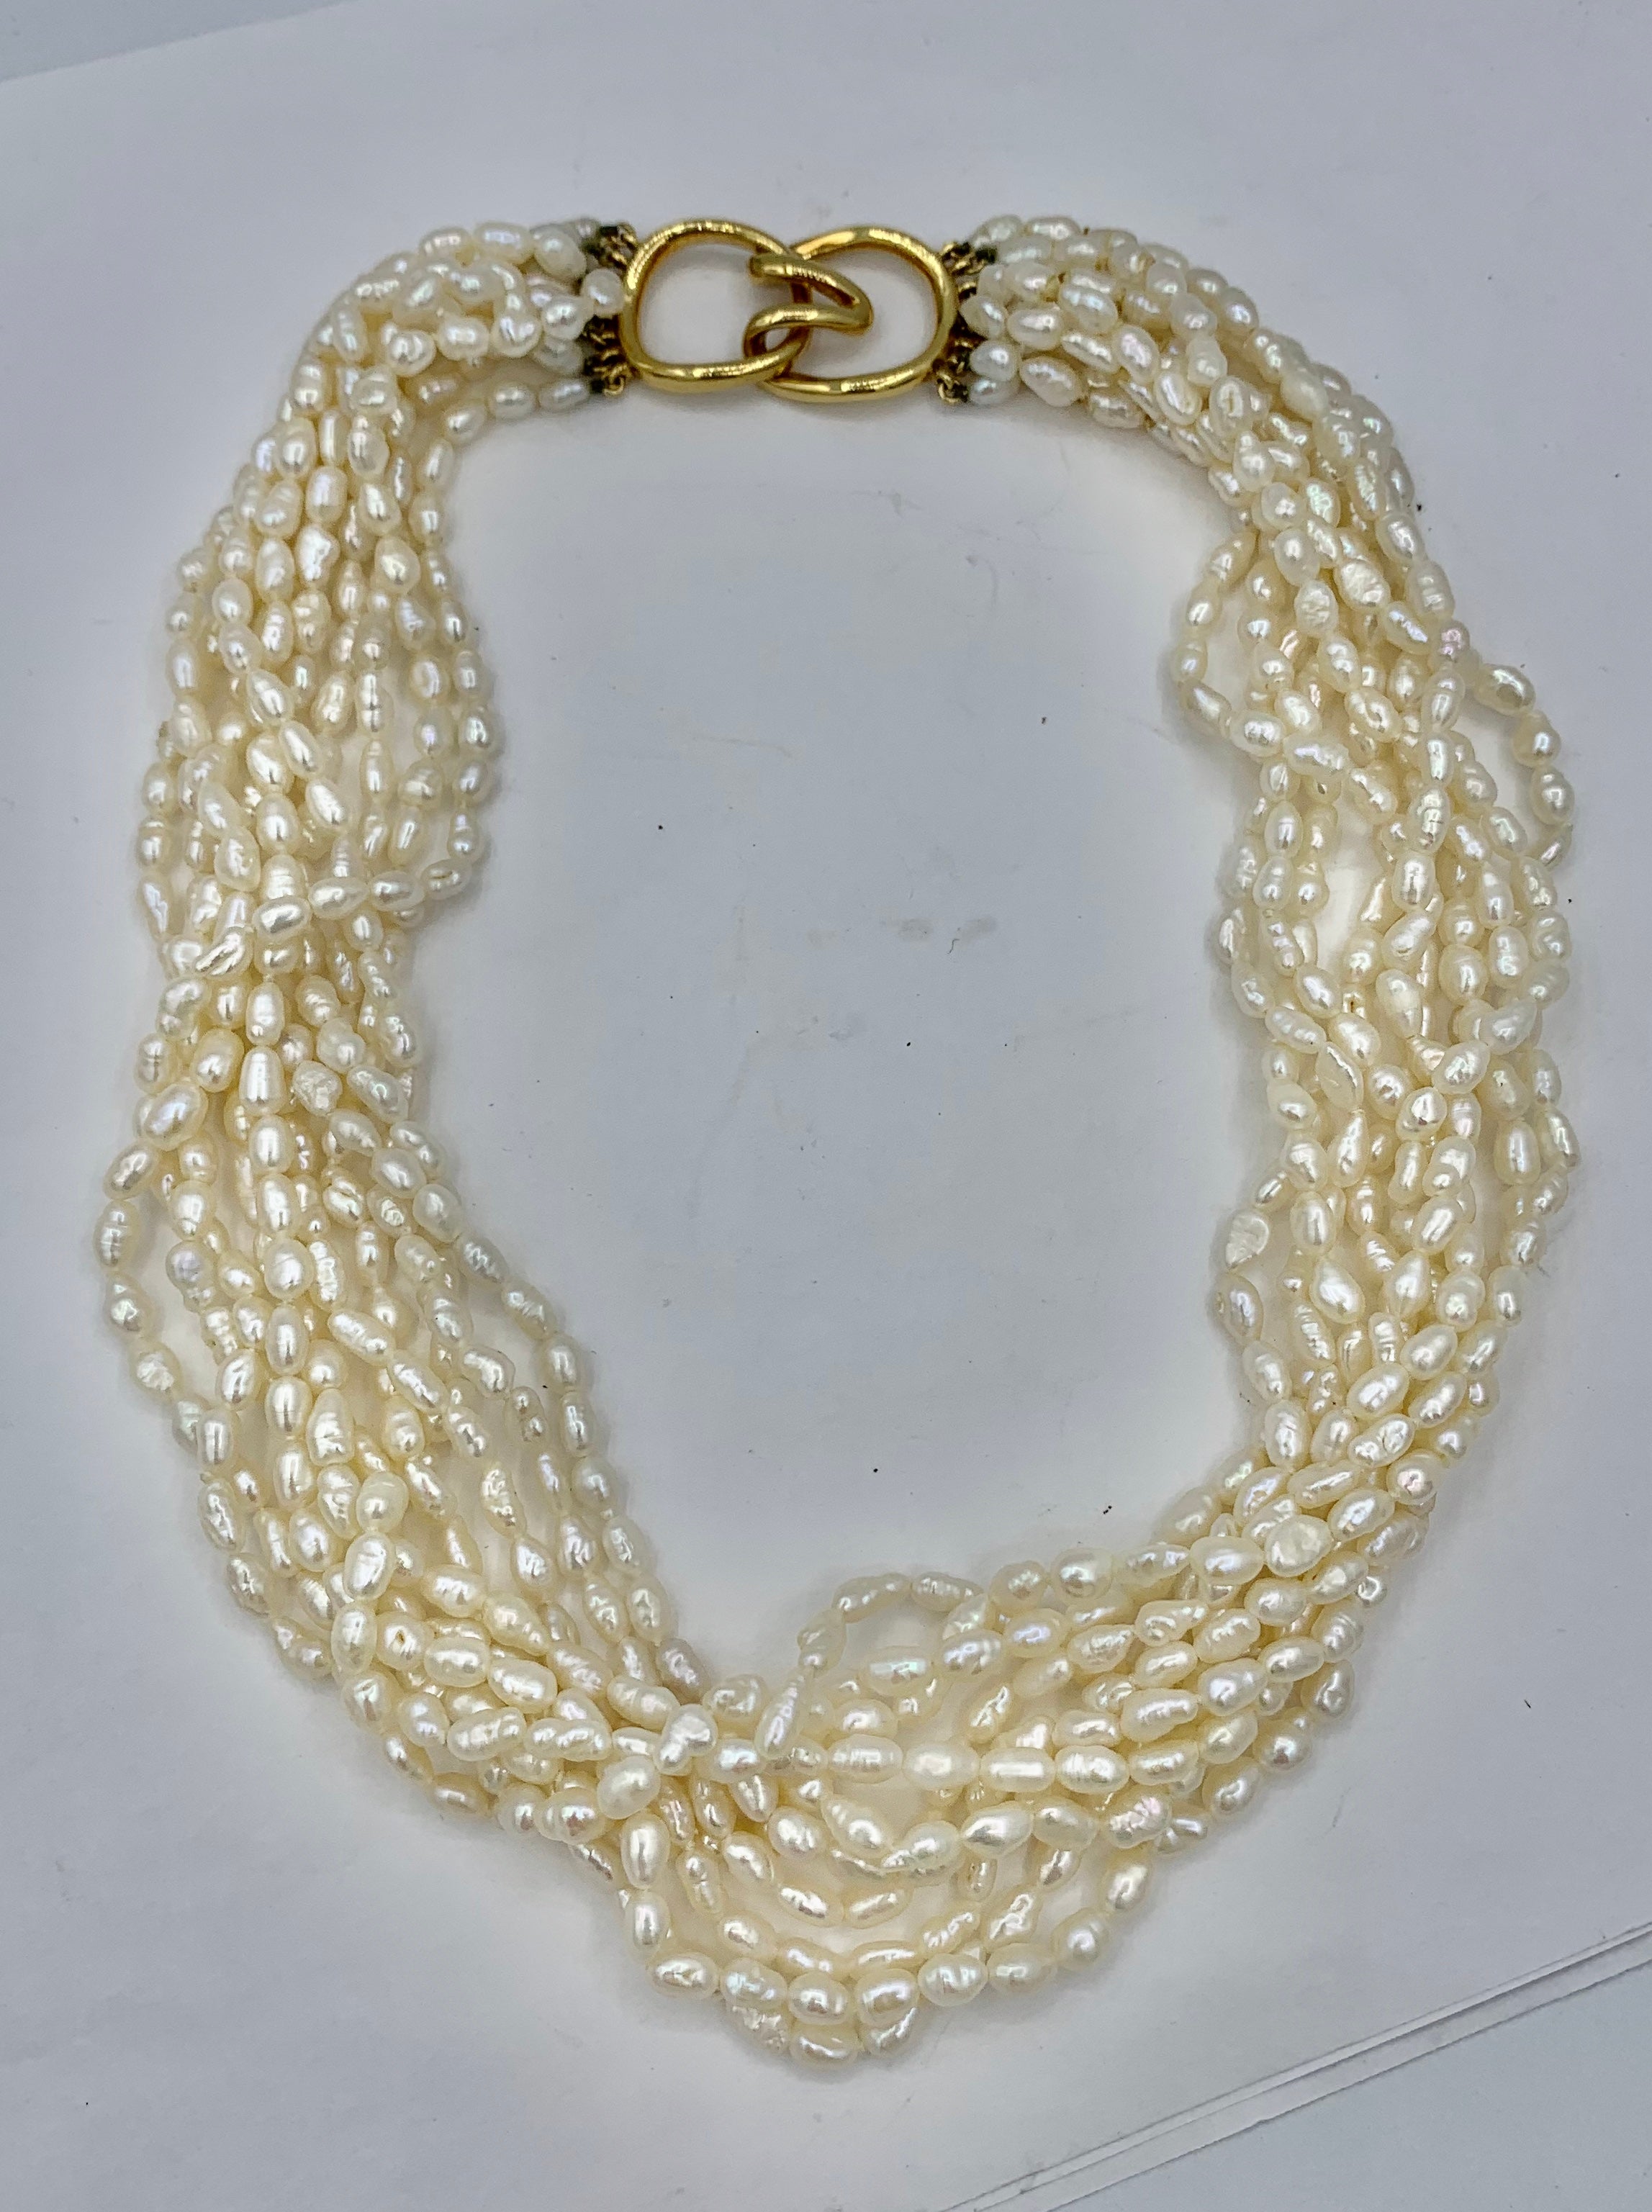 This is a stunning vintage Tiffany & Co. Freshwater Pearl Torsade Necklace with an 18 Karat Yellow Gold signed Tiffany clasp.  The Tiffany torsade necklace has ten strands of freshwater biwa pearls.  The necklace is signed Tiffany & Co.  The